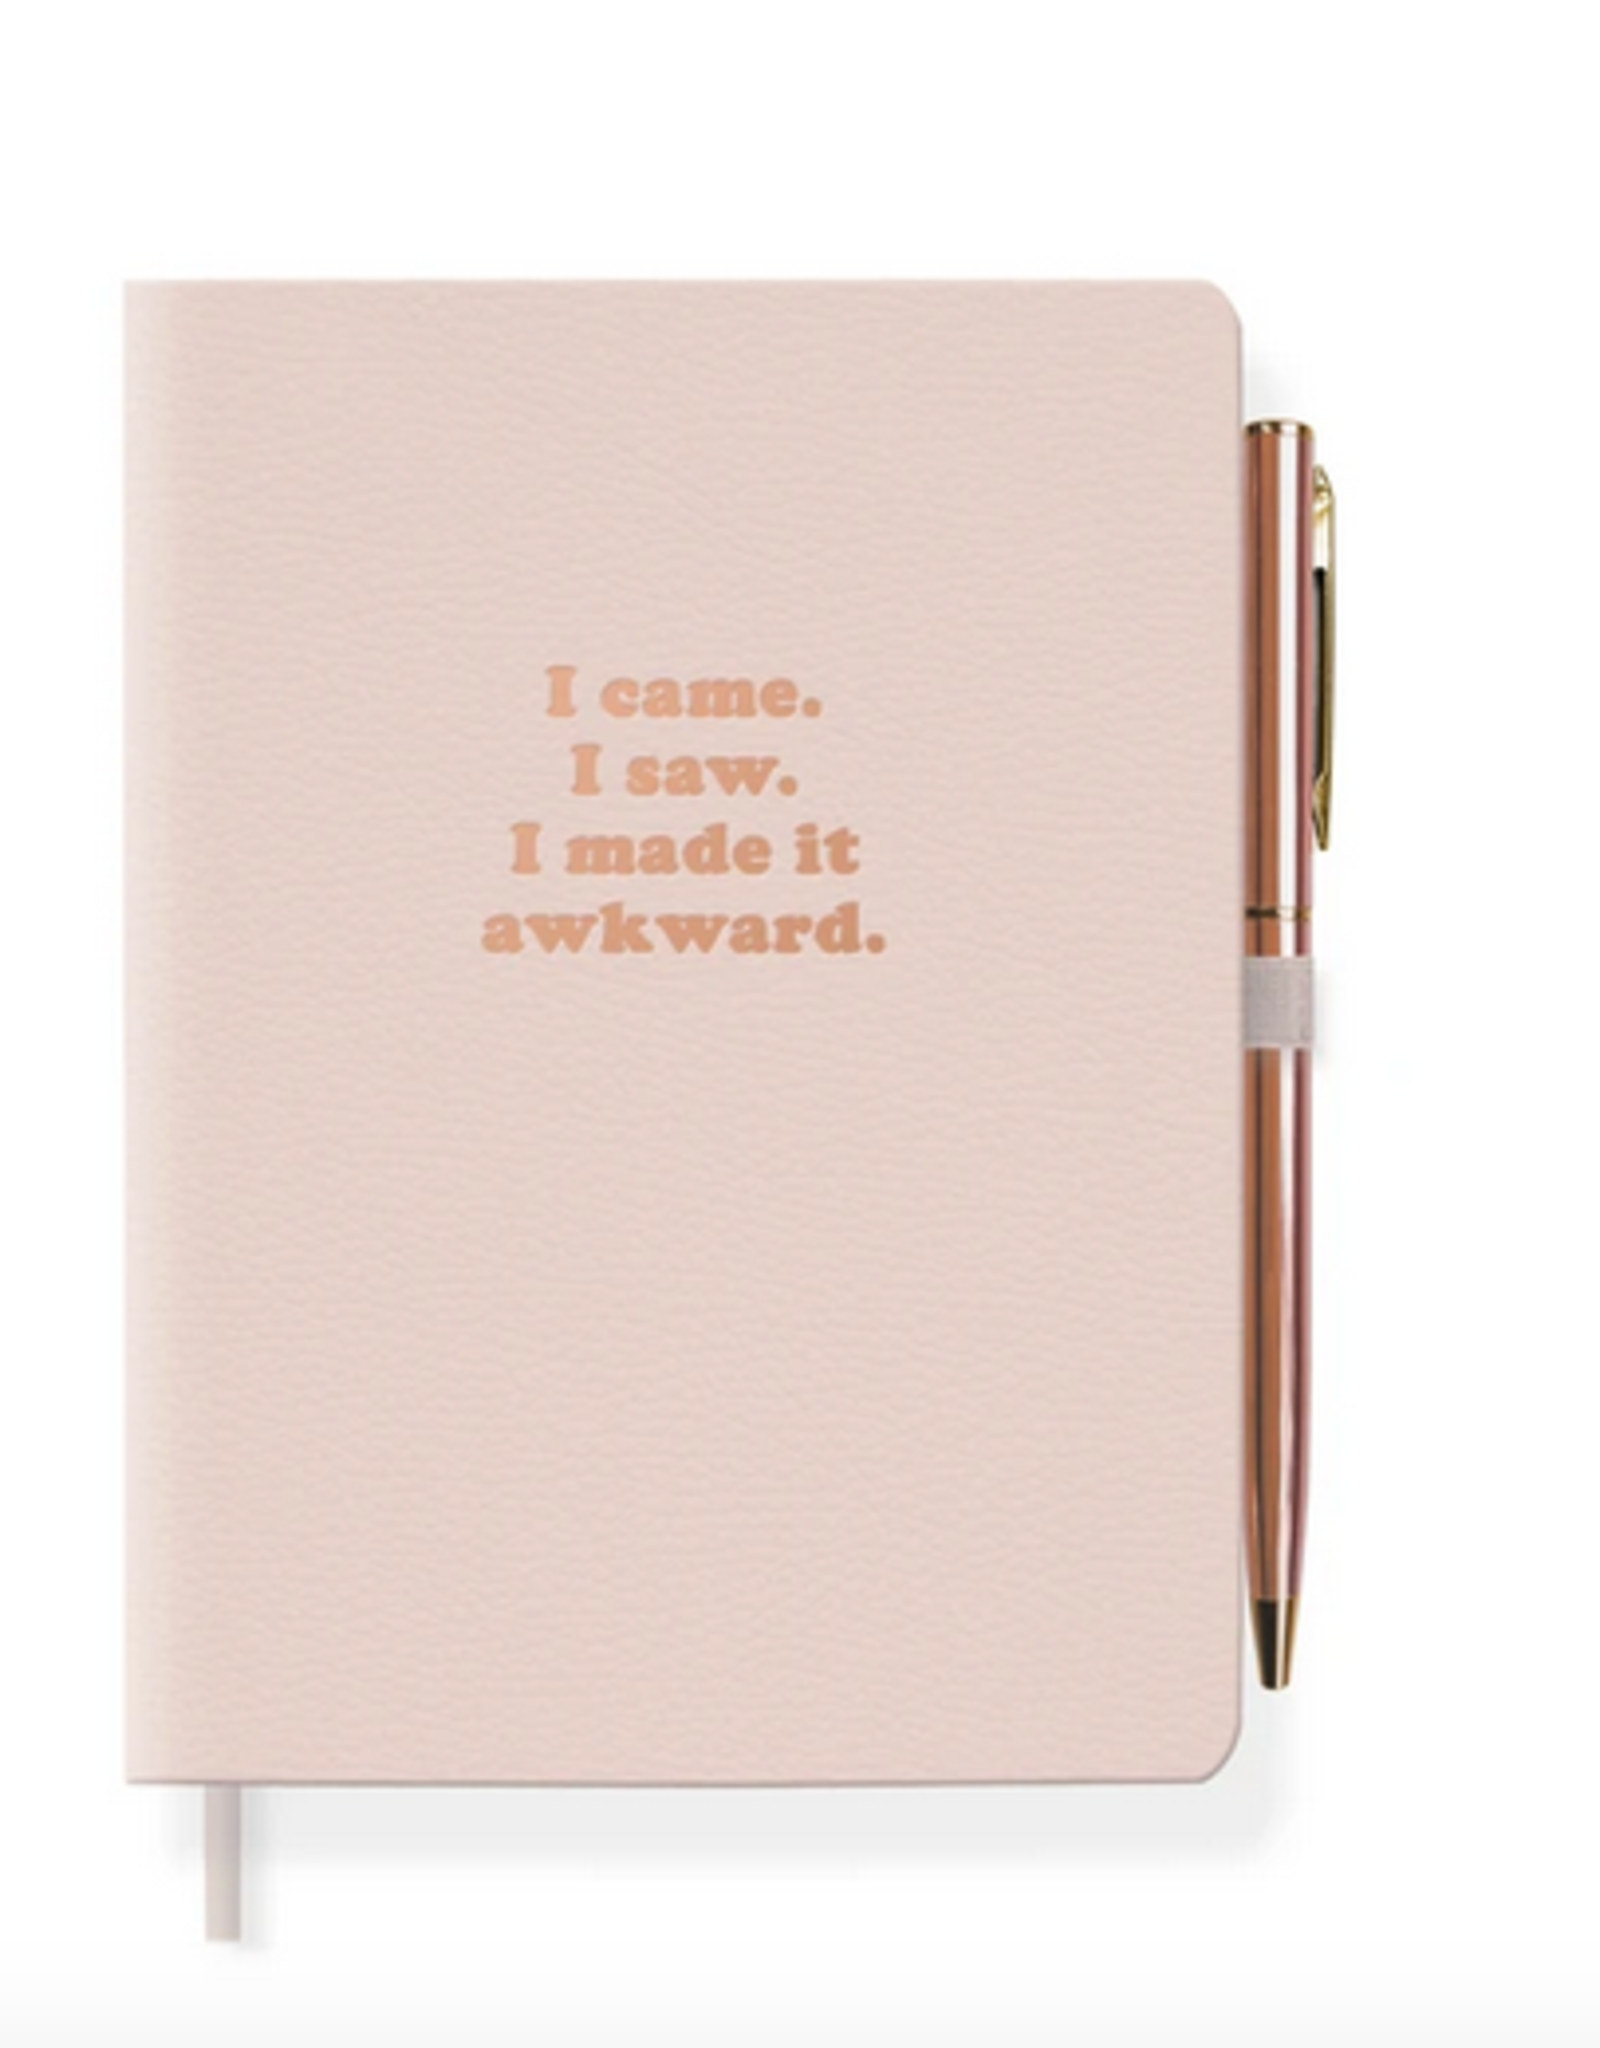 Awkward Journal with Pen 4.5" x 6.5"